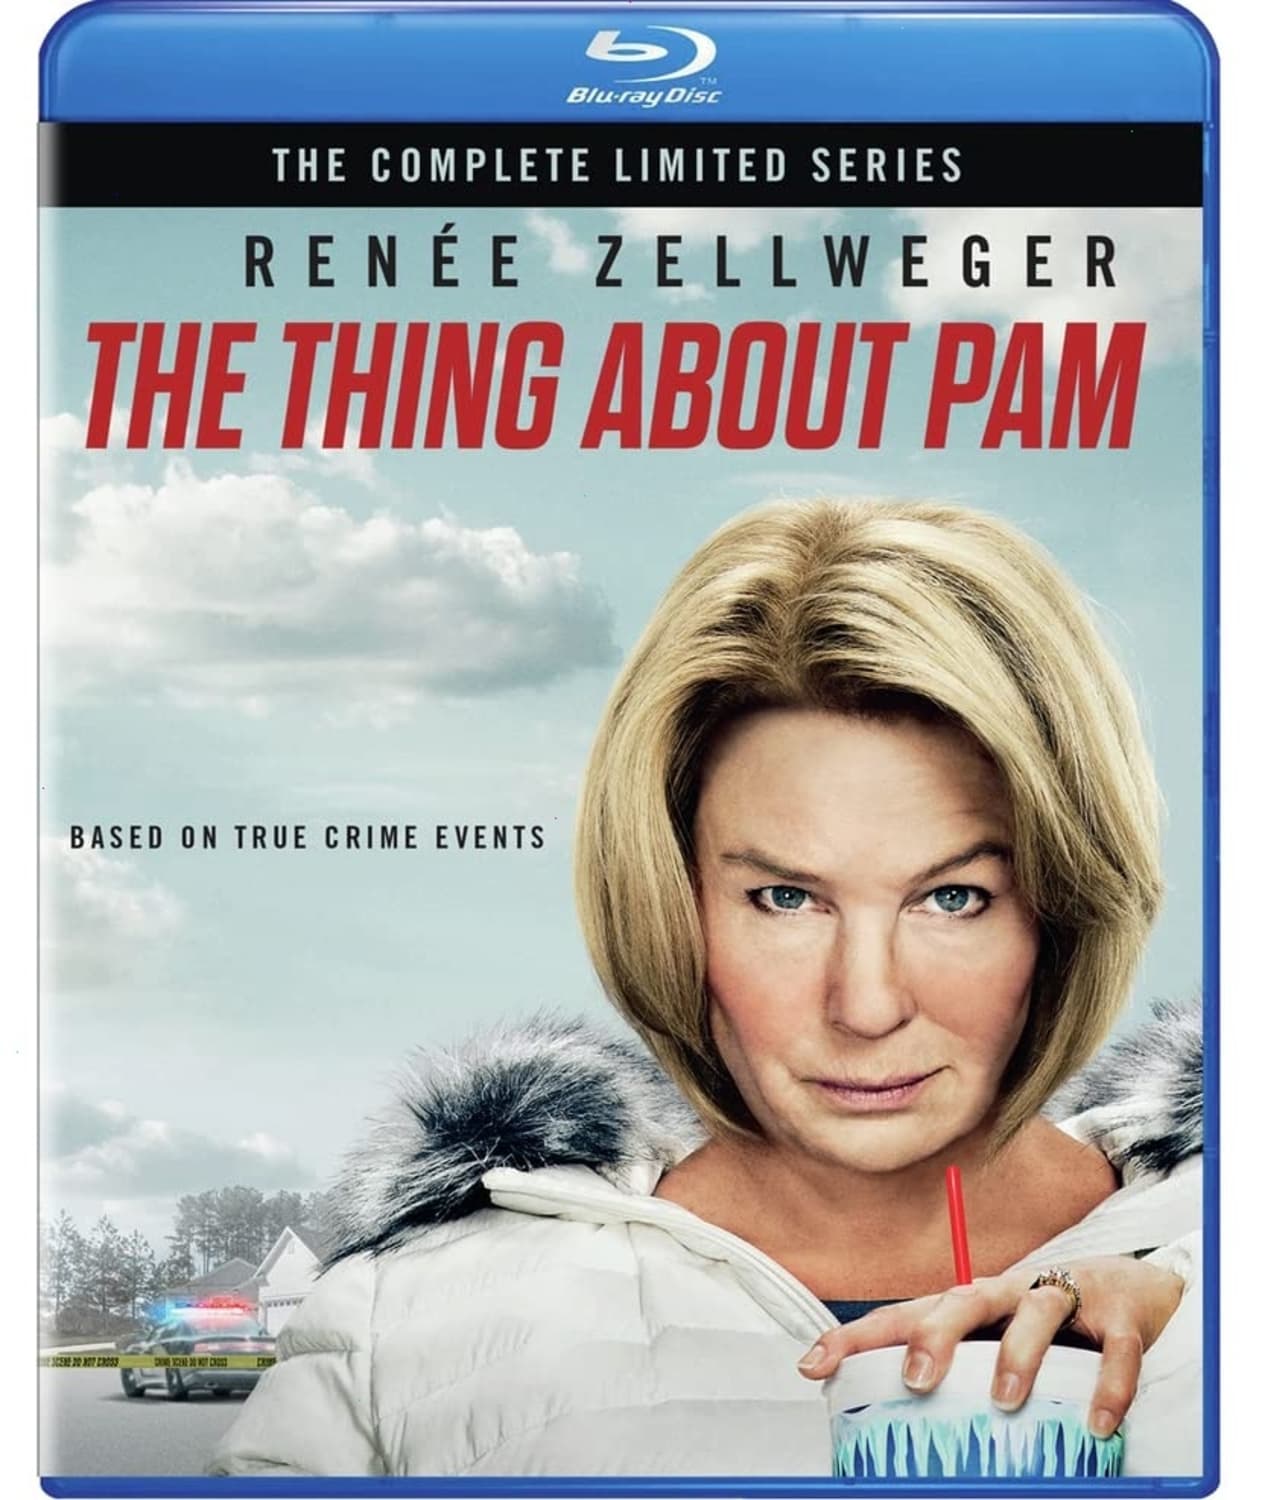 The Thing About Pam: The Complete Limited Series (Blu-ray) on MovieShack